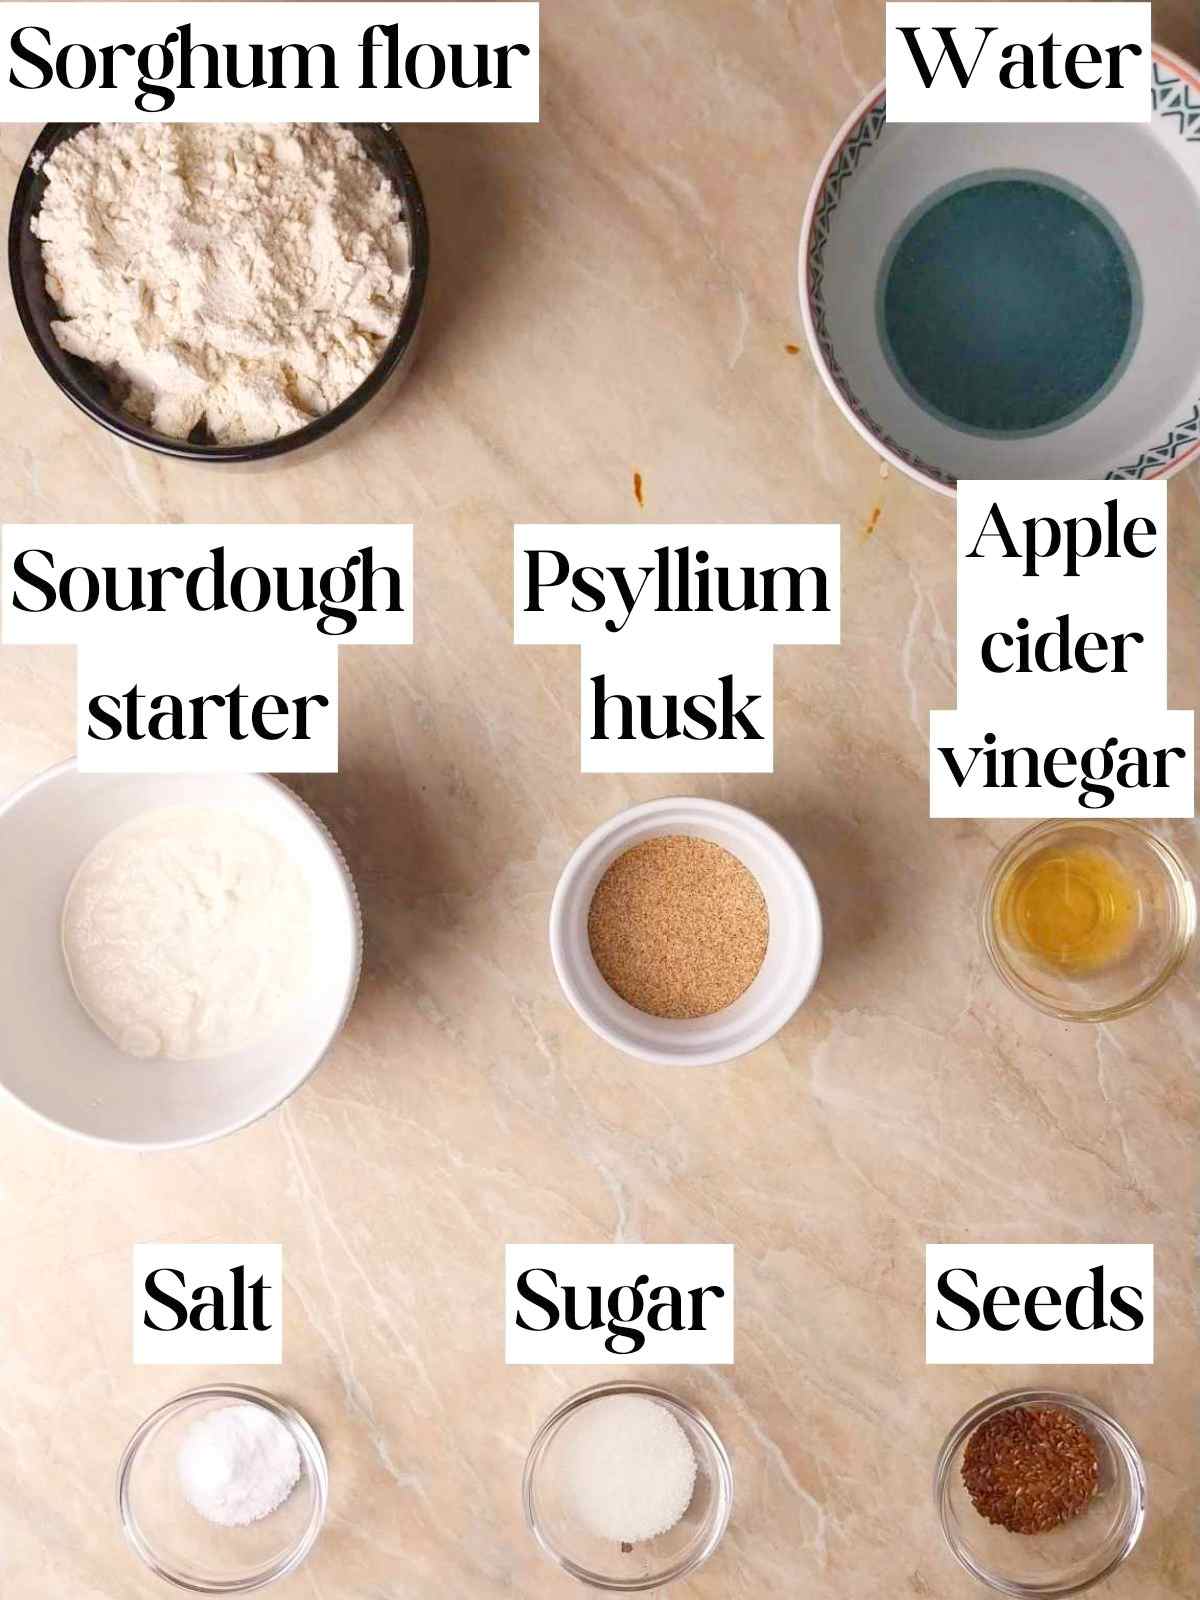 Ingredients on a kitchen table.